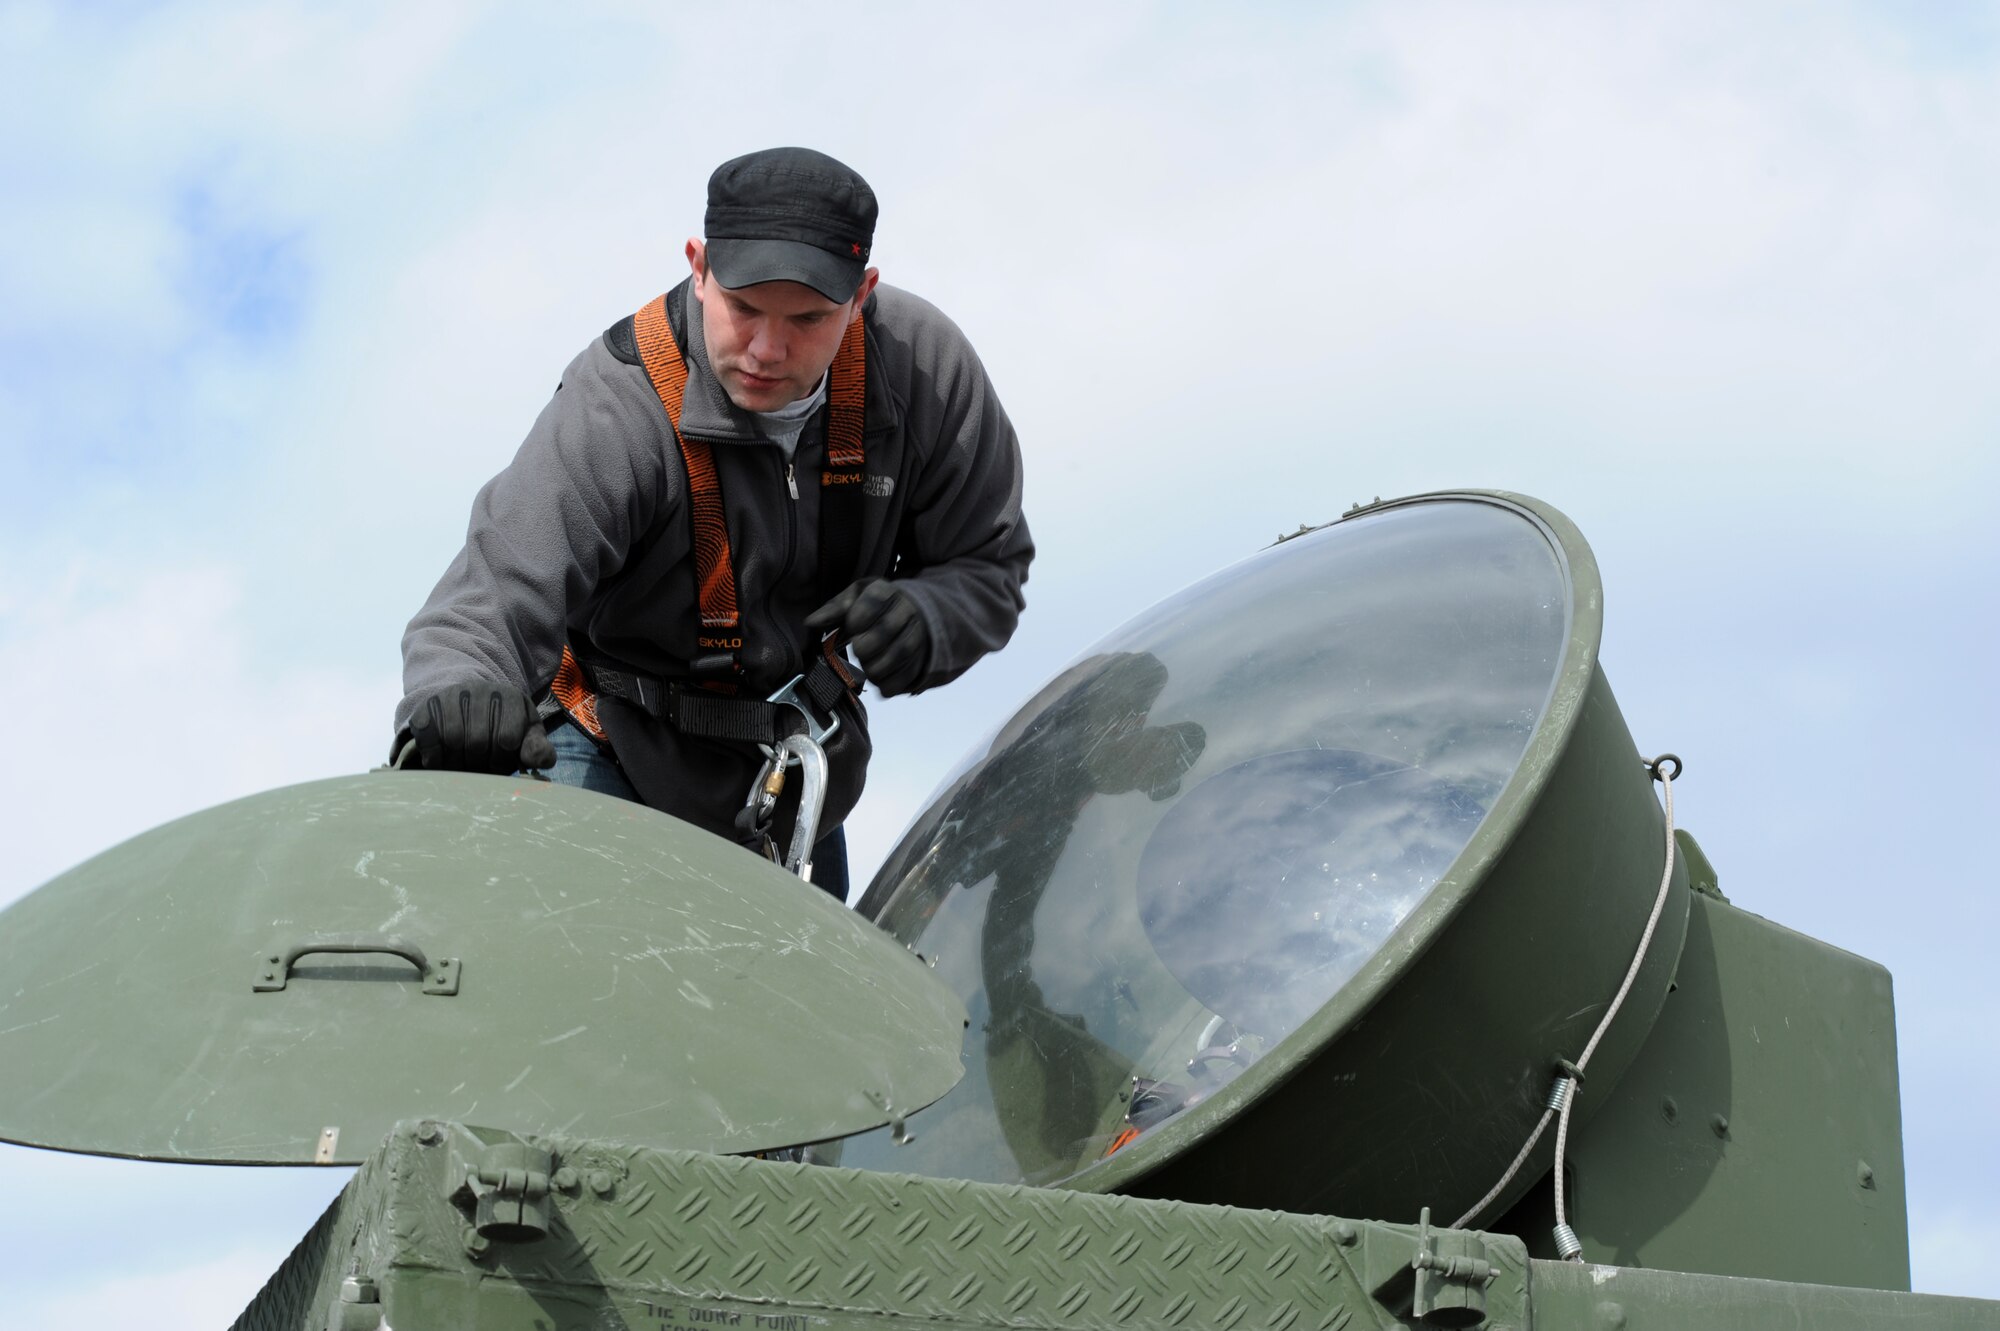 KONY, Turkey – Carl Gessman, Polygone radar operator, removes the cover from a tactical radar threat generator during Anatolian Falcon 2012 in Konya, Turkey, March 8. Polygone is a multinational aircrew electronic warfare tactics facility located in Europe and was used to simulate pop-up ground threats throughout the exercise. (U.S. Air Force photo/Staff Sgt. Benjamin Wilson)